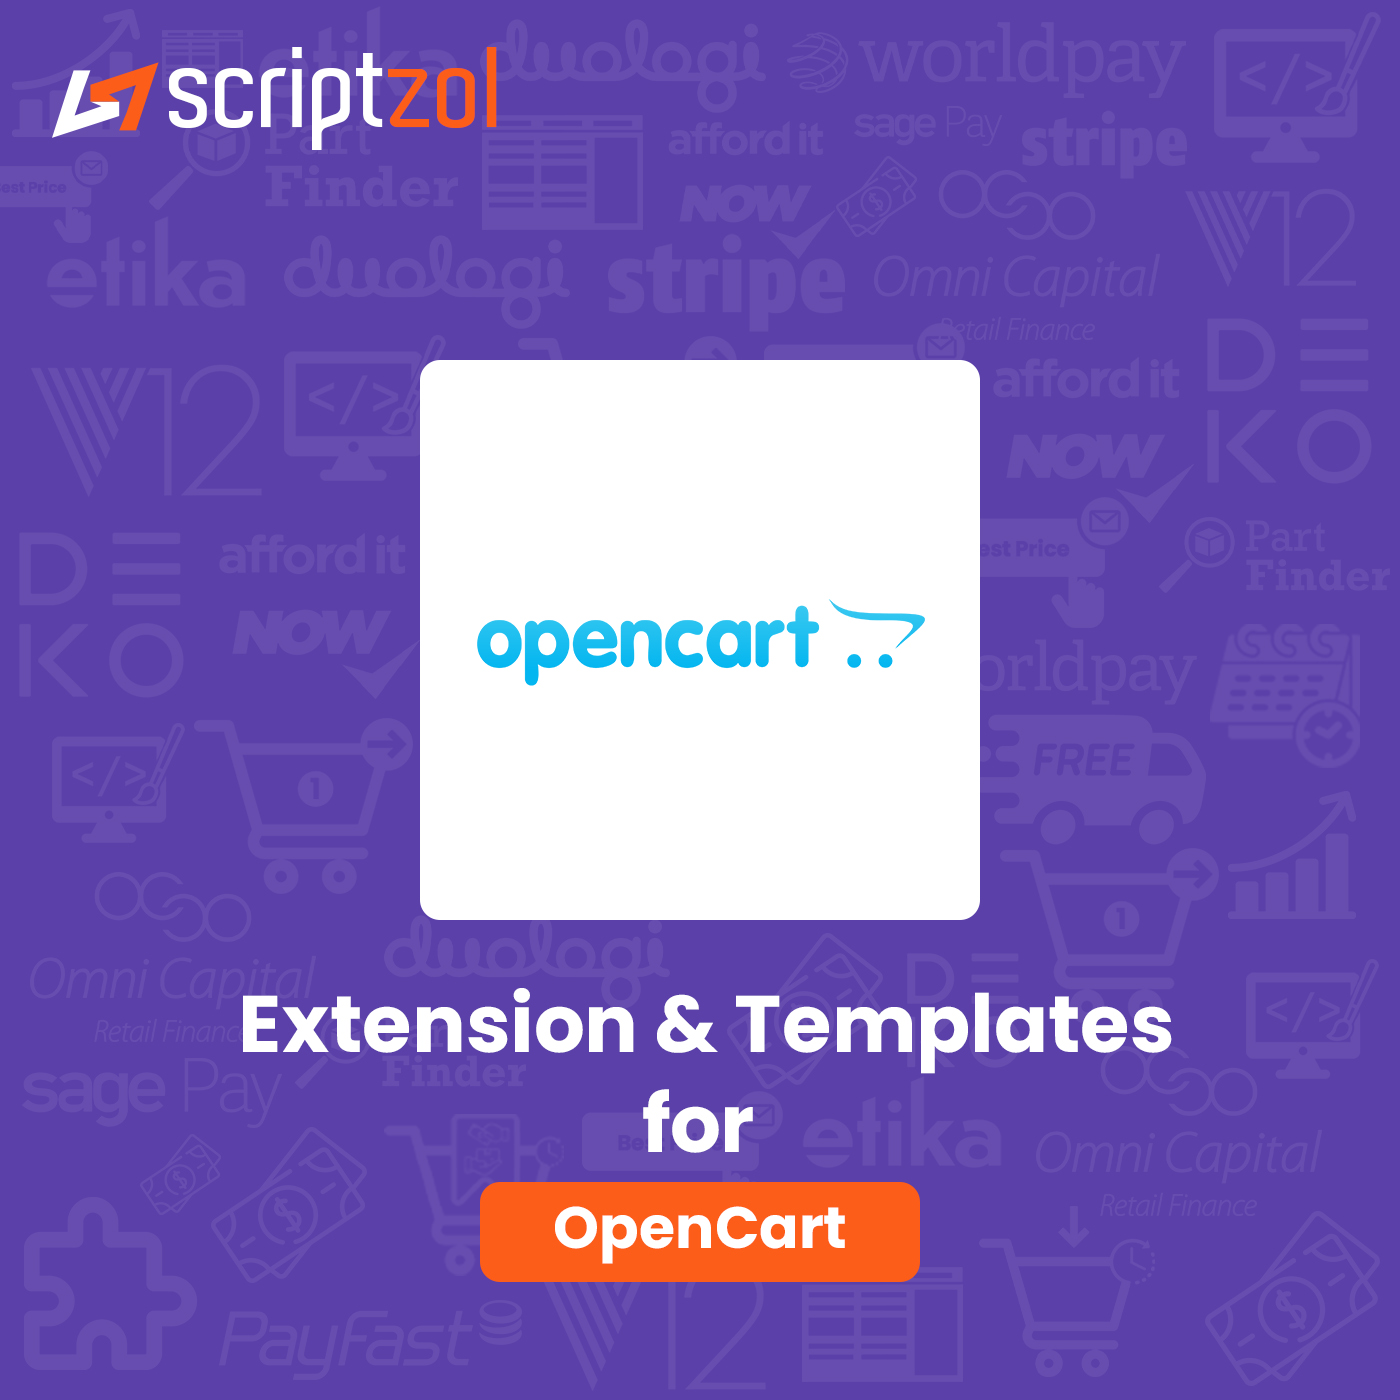 OpenCart Extension Development Company in India | Best OpenCart Modules & Themes in UK - Scriptzol